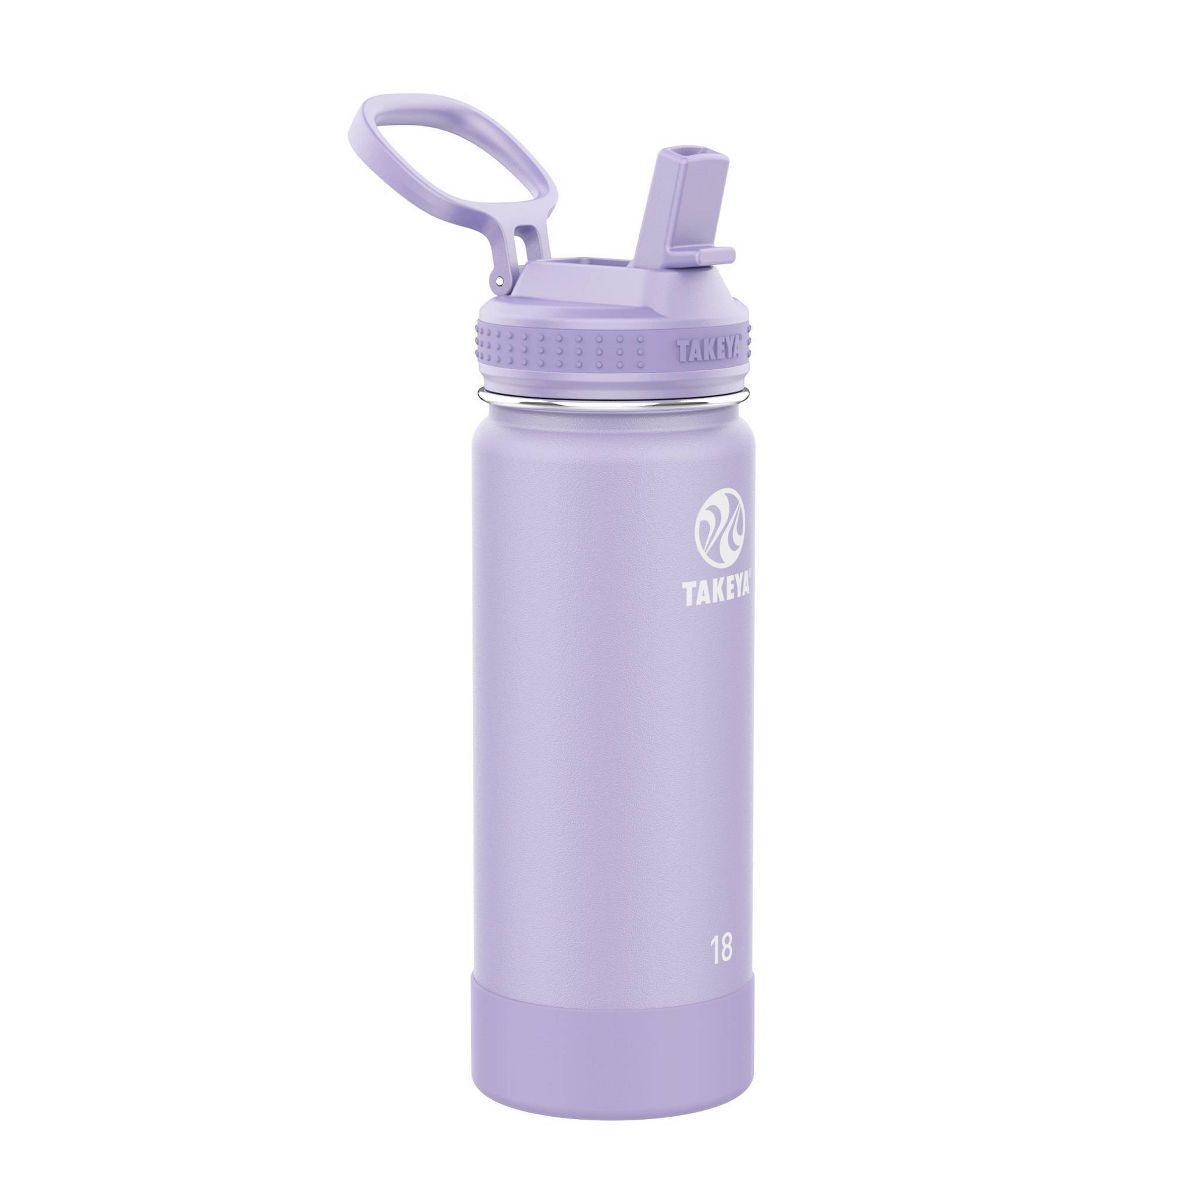 Takeya 18oz Actives Insulated Stainless Steel Water Bottle with Straw Lid | Target